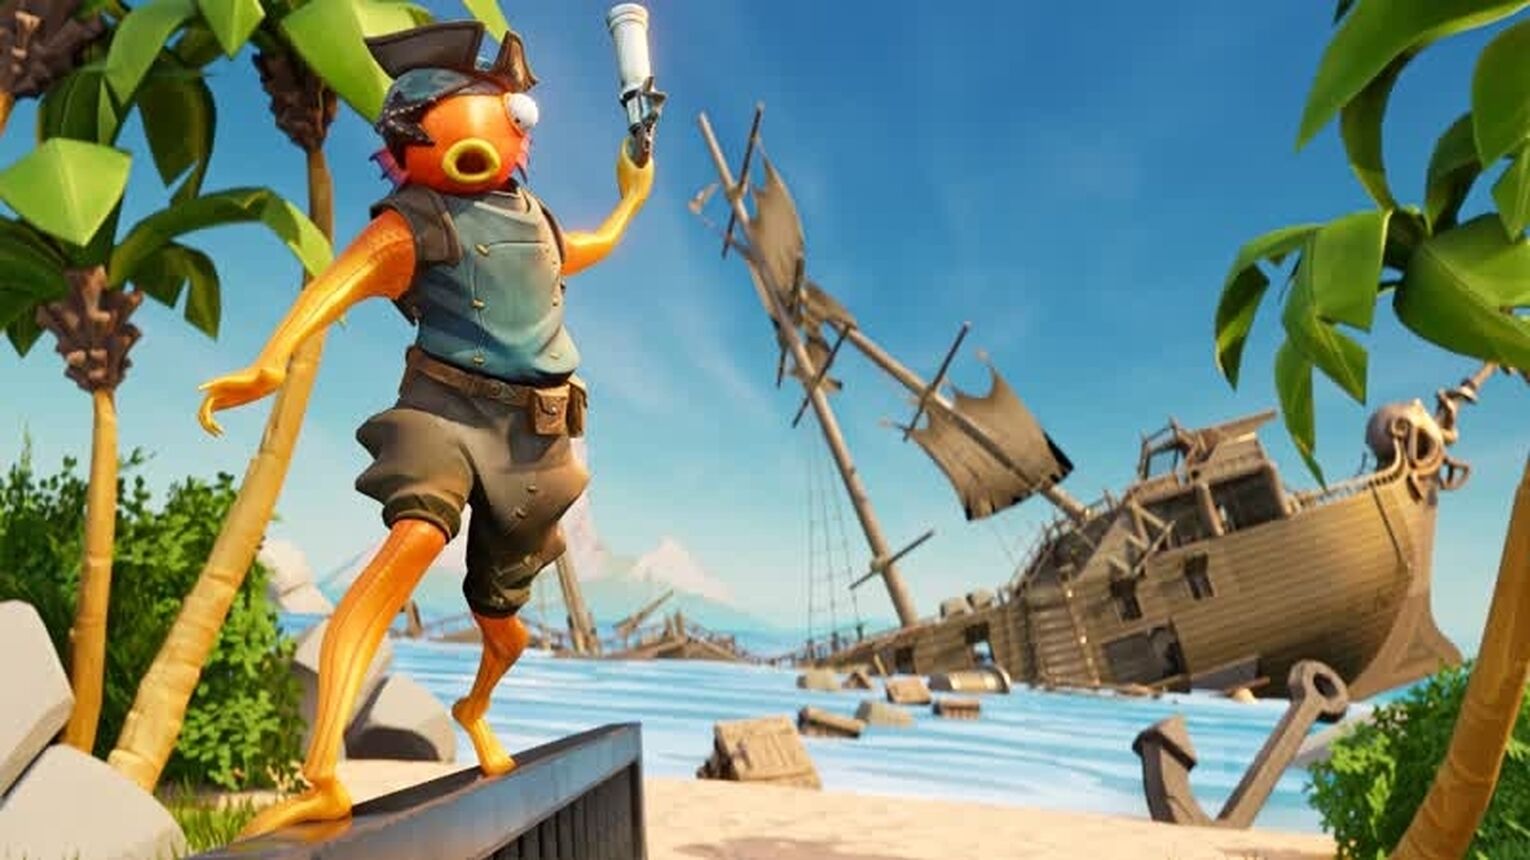 Fishstick posing in front of sinking ship